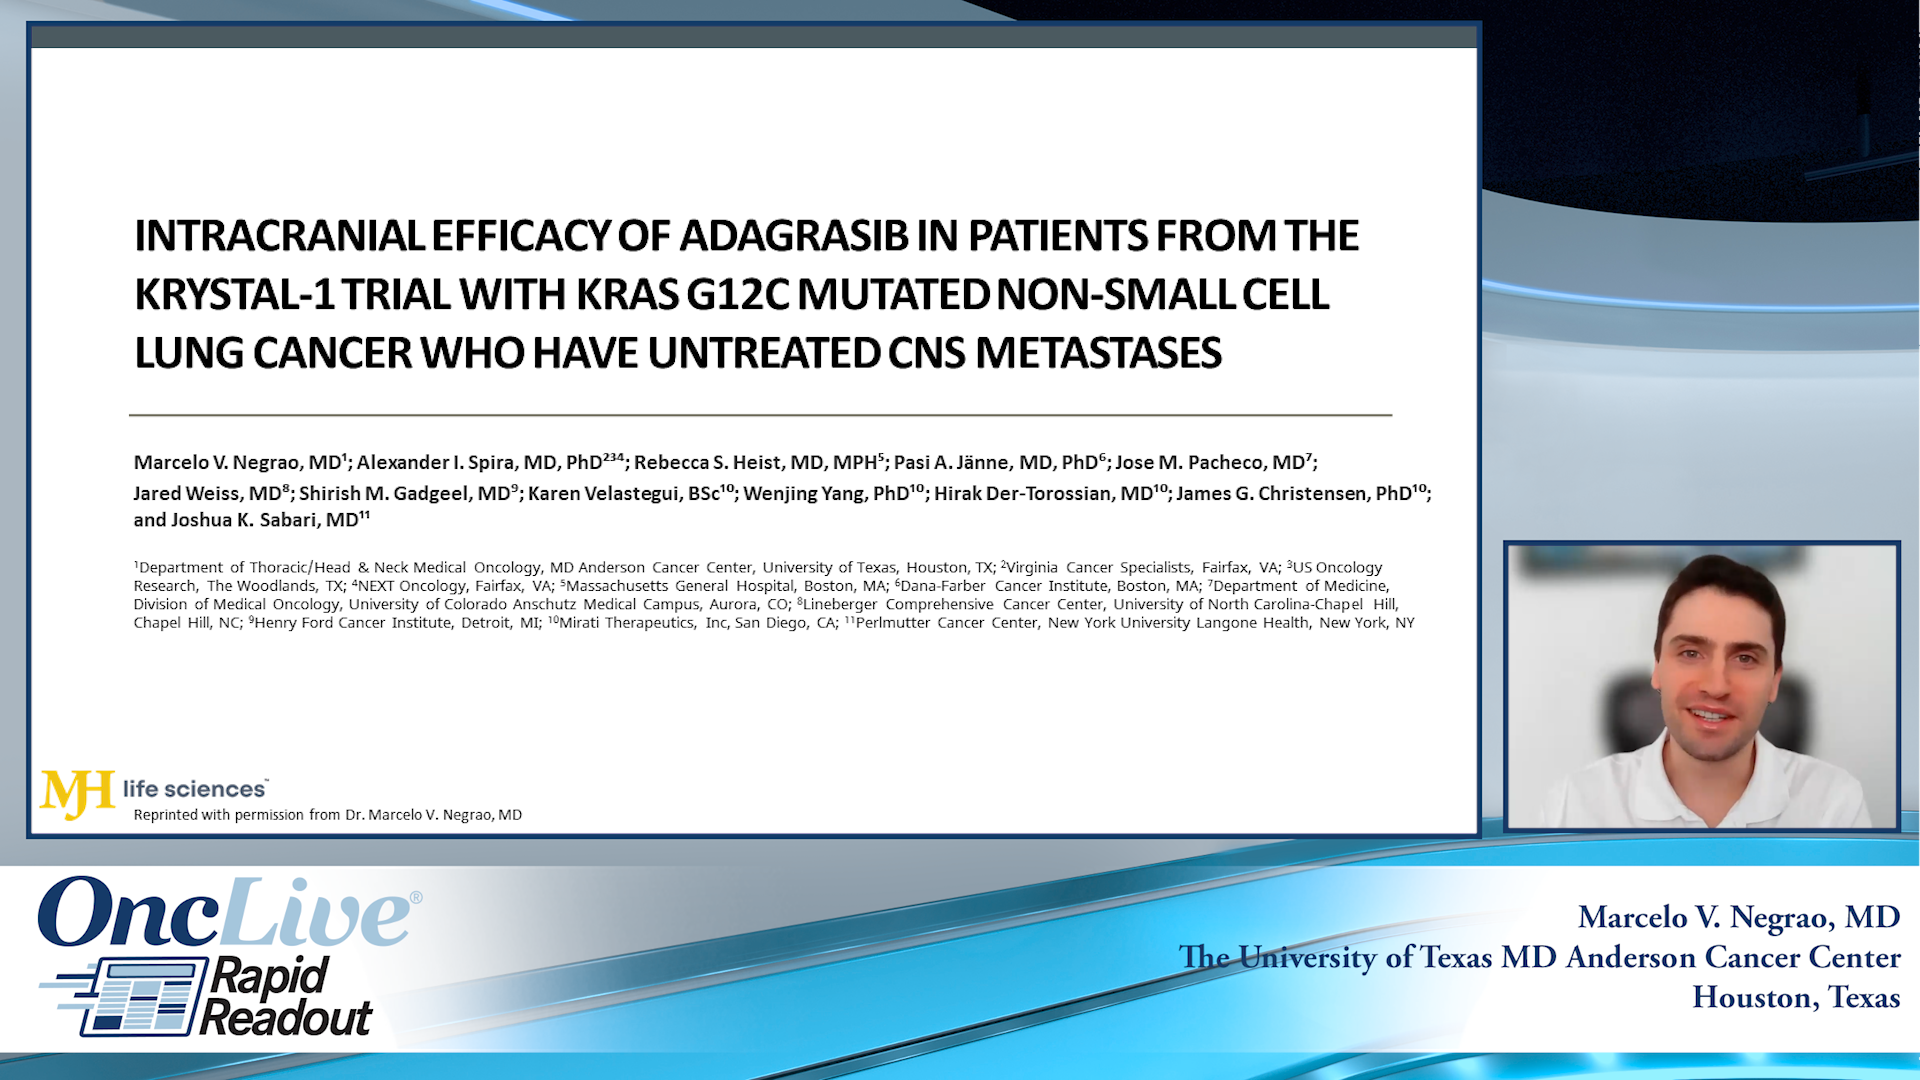 Intracranial Efficacy of Adagrasib in Patients From the KRYSTAL-1 Trial With KRAS G12C–Mutated Non-Small Cell Lung Cancer Who Have Untreated CNS Metastases